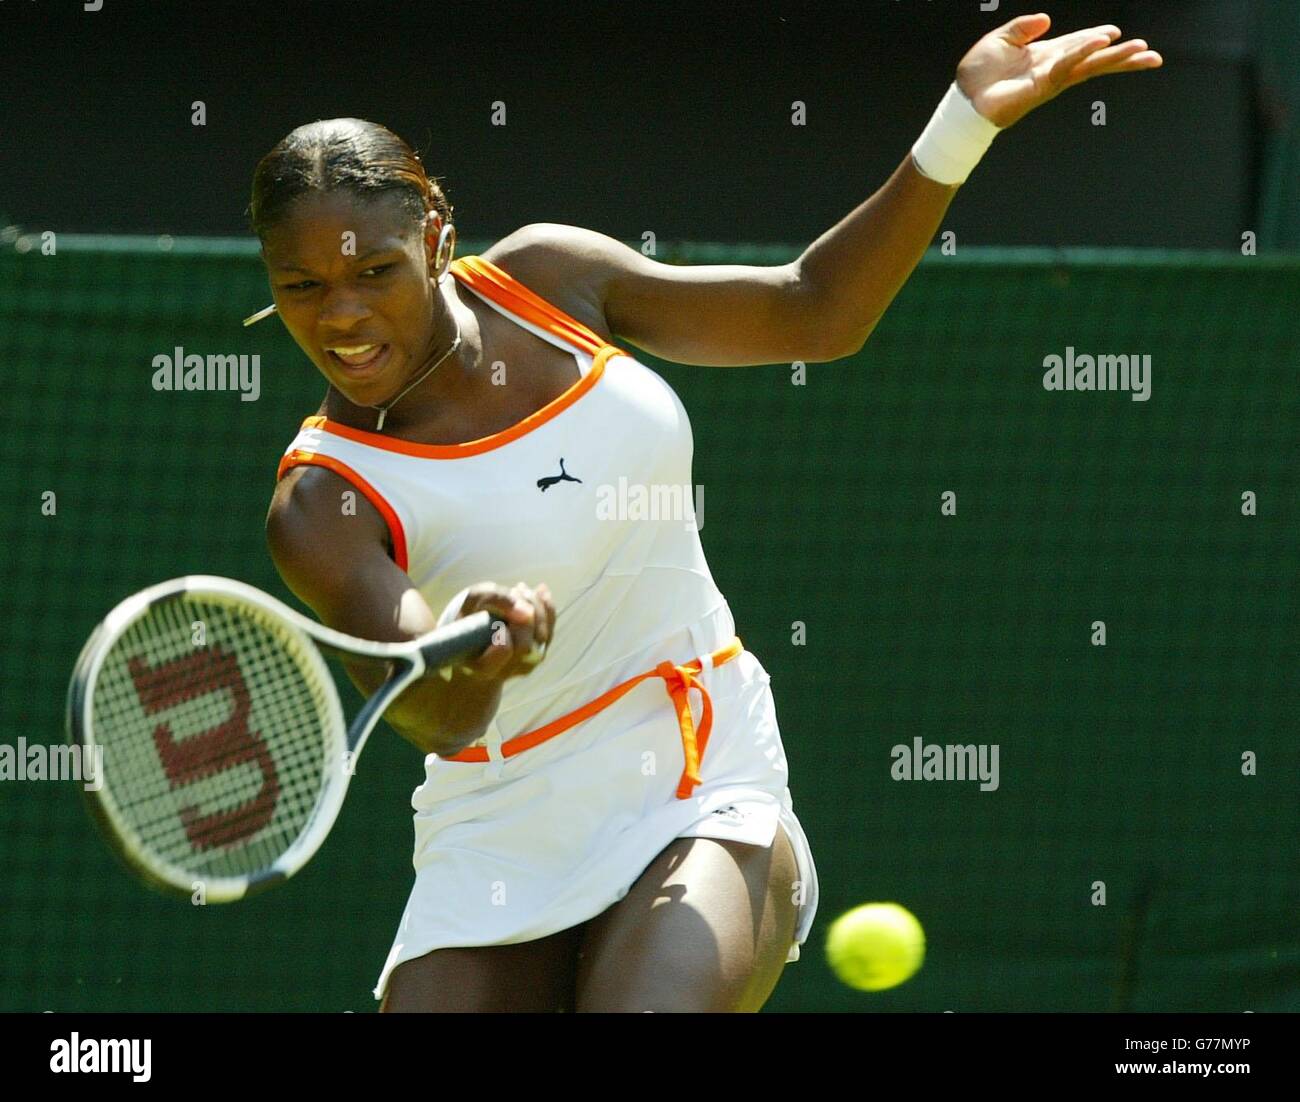 Defending champion Serena Williams in action on Centre Court against Jill Craybas from the USA at the All England Lawn Tennis Championships in Wimbledon. Williams defeated Craybas in straight sets 6-3, 6-3. Stock Photo